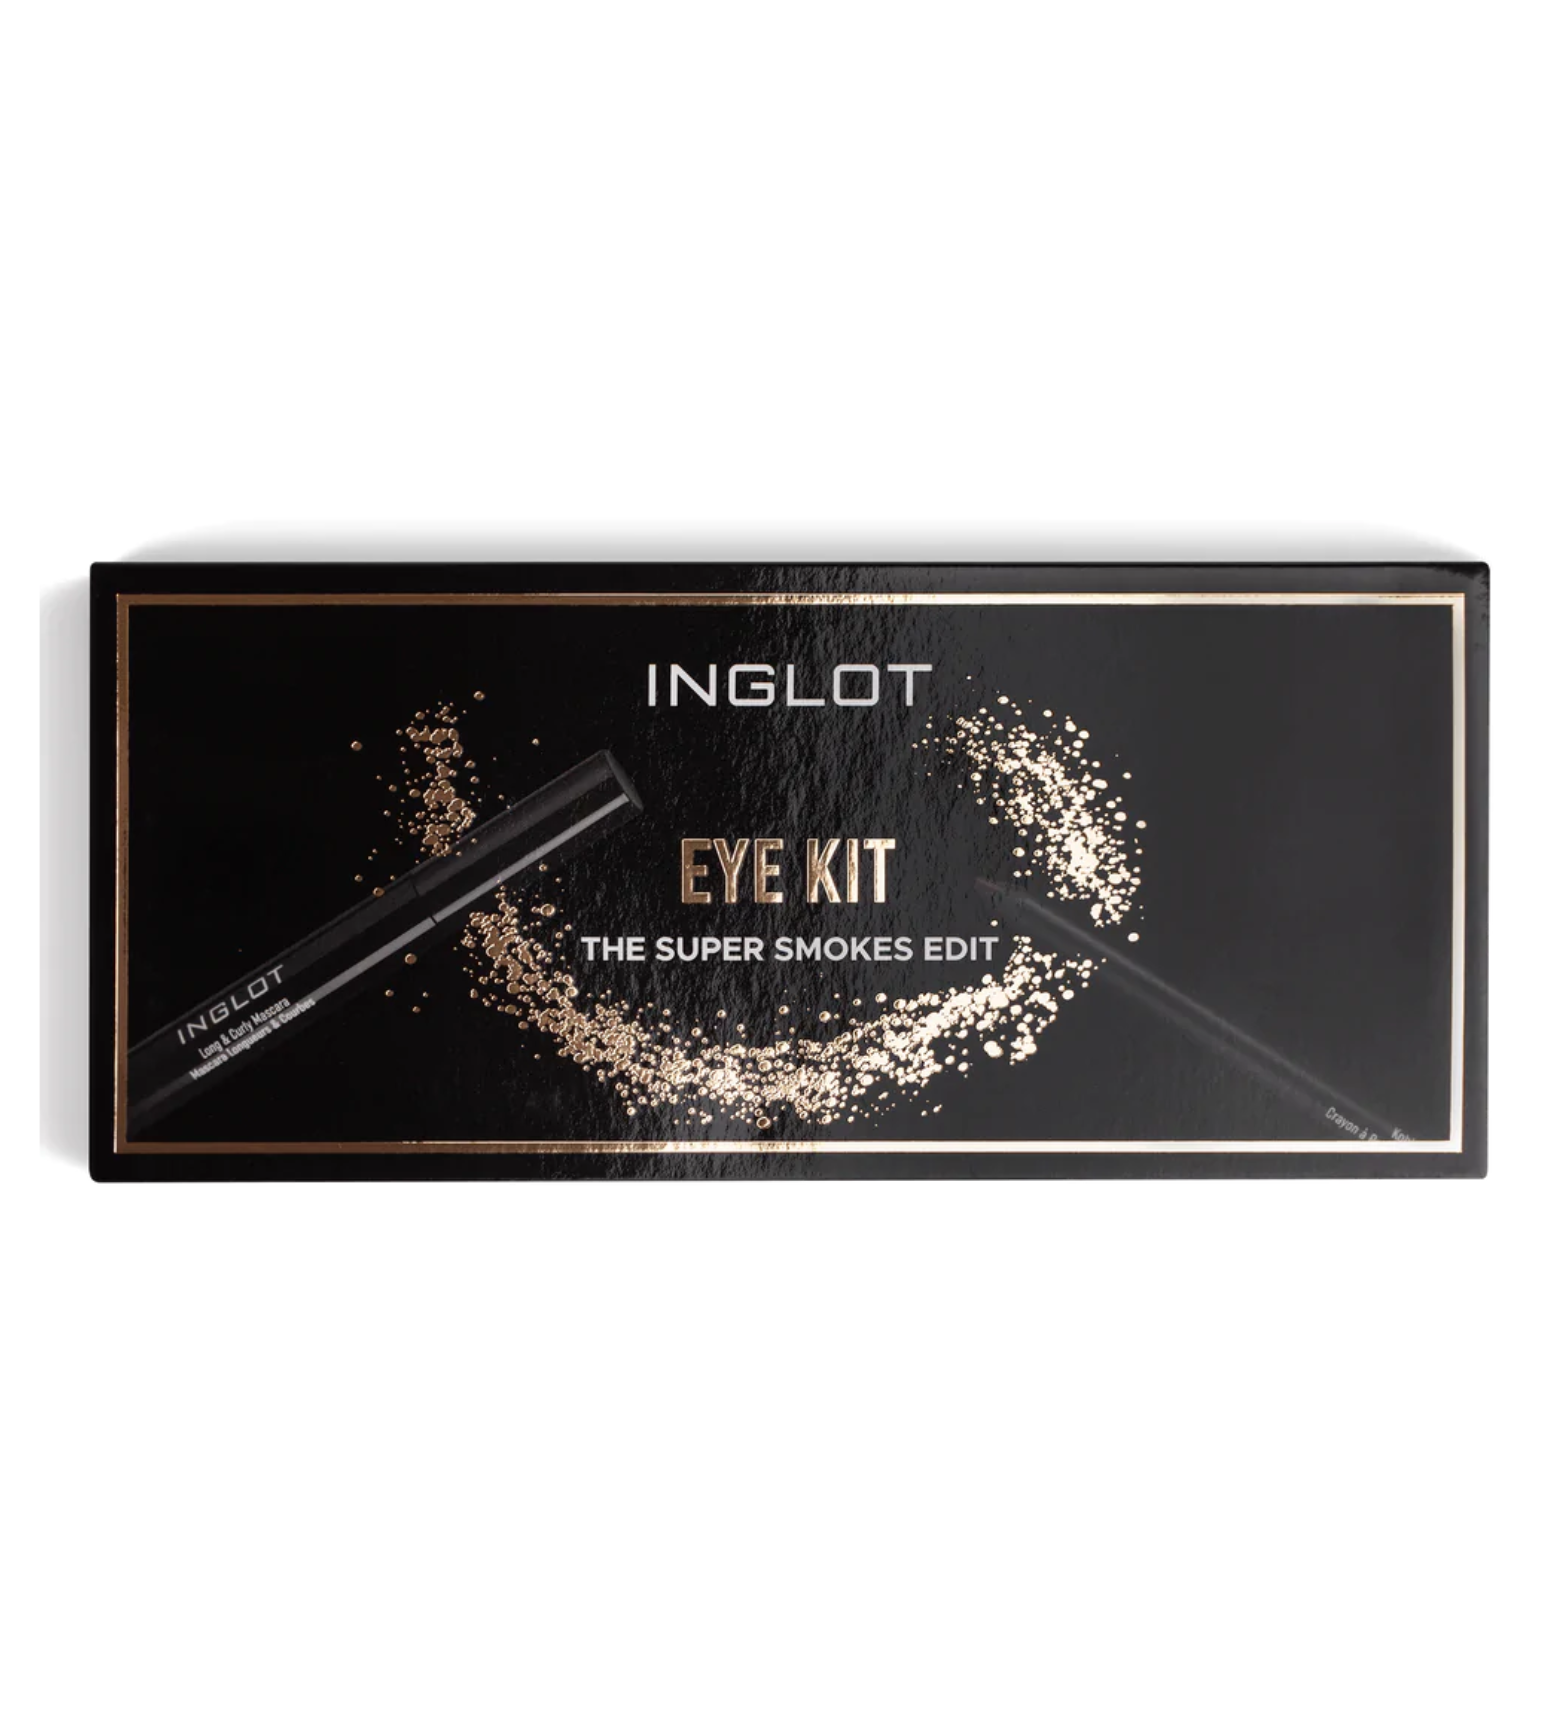 Packaging of Inglot The Super Smokes Edit